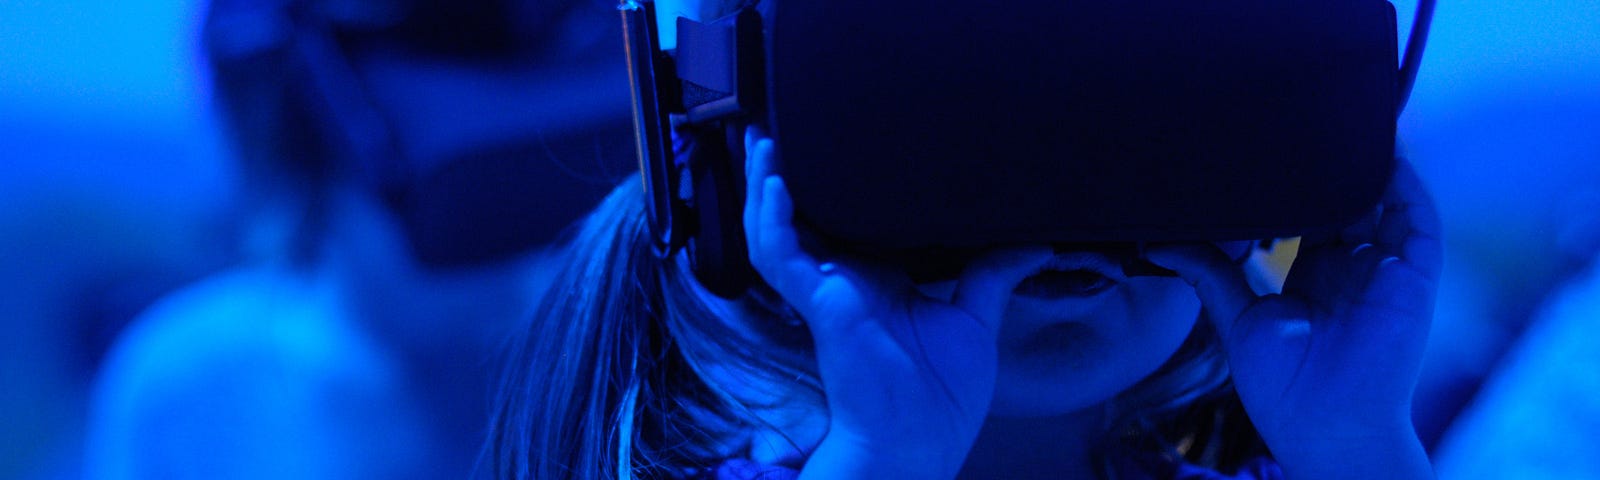 Image of a child using VR goggles